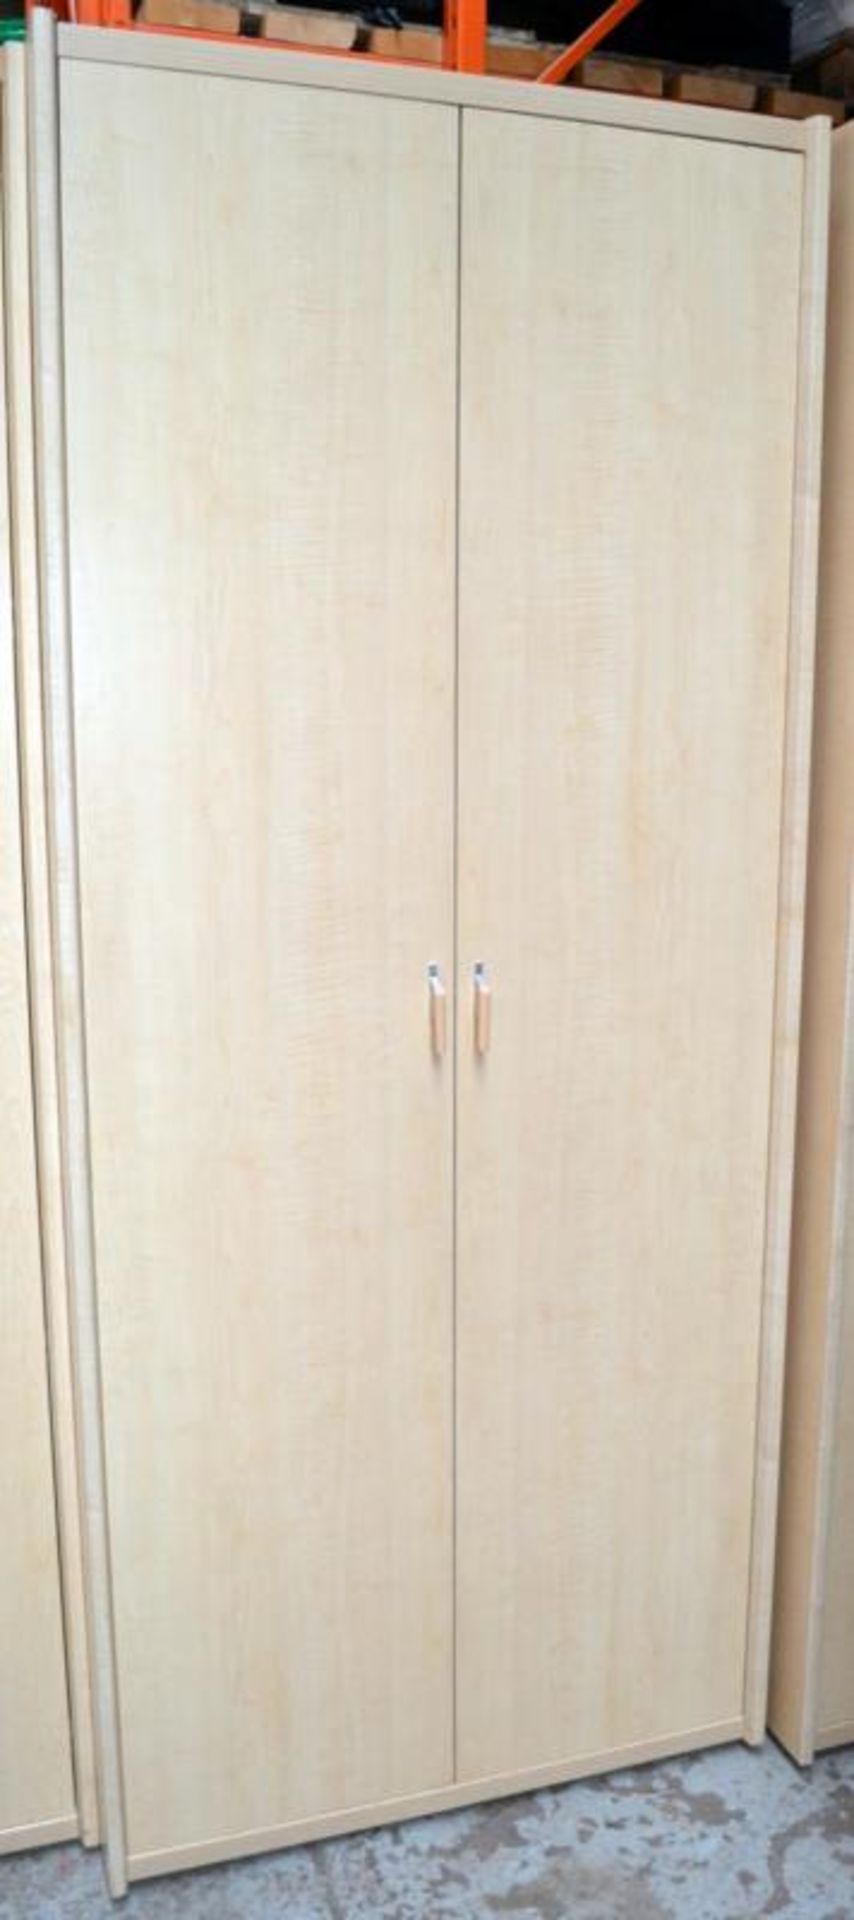 1 x GAUTIER Tall Wardrobe With A Natural Oak Style Finish - Made In France - Dimensions: H222 x W93. - Image 5 of 7